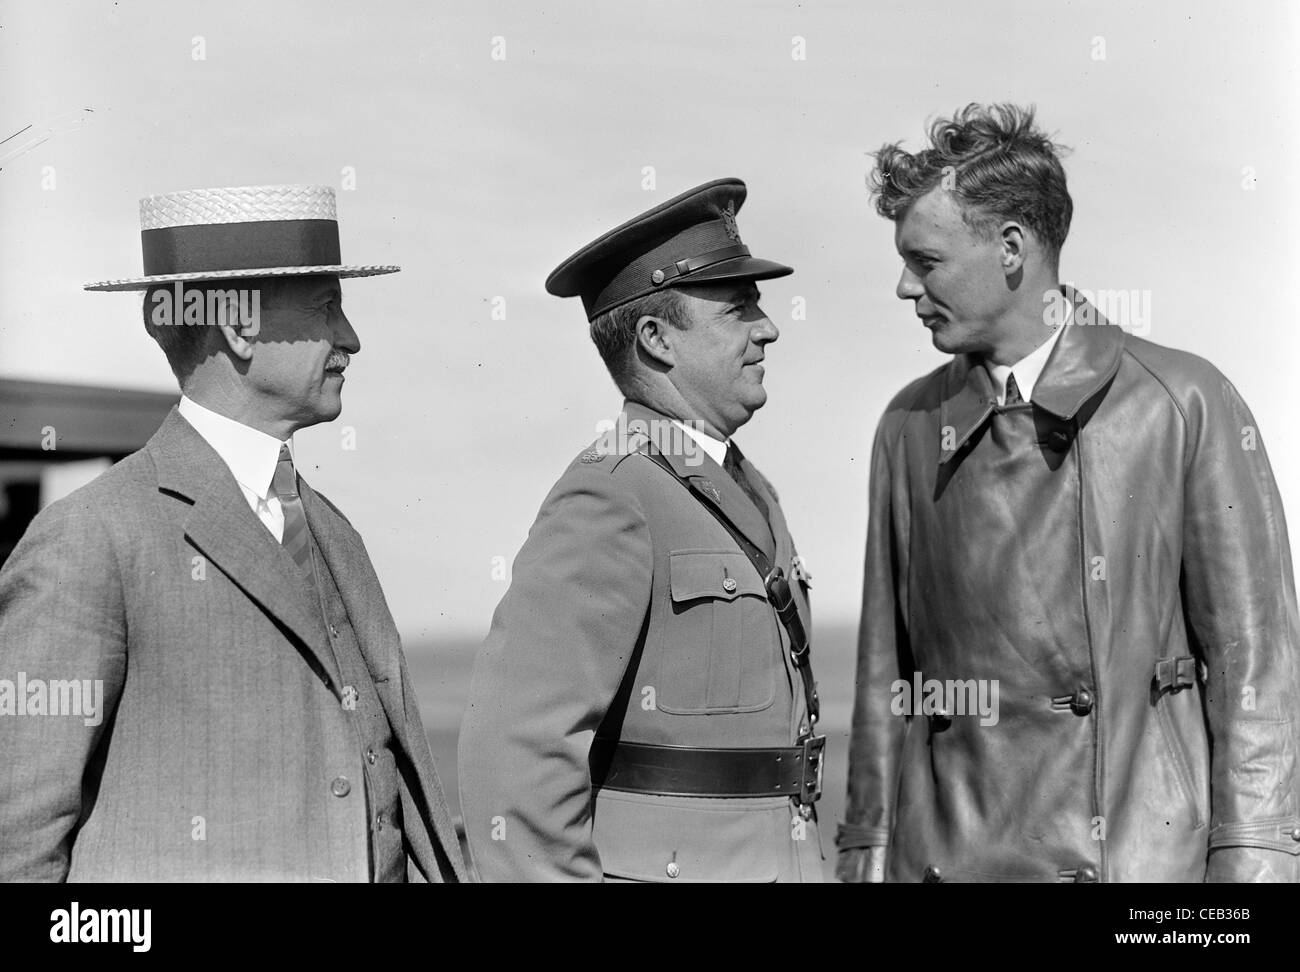 Charles Augustus Lindbergh, centre right, was an American aviator, author, inventor, explorer, and social activist. Stock Photo